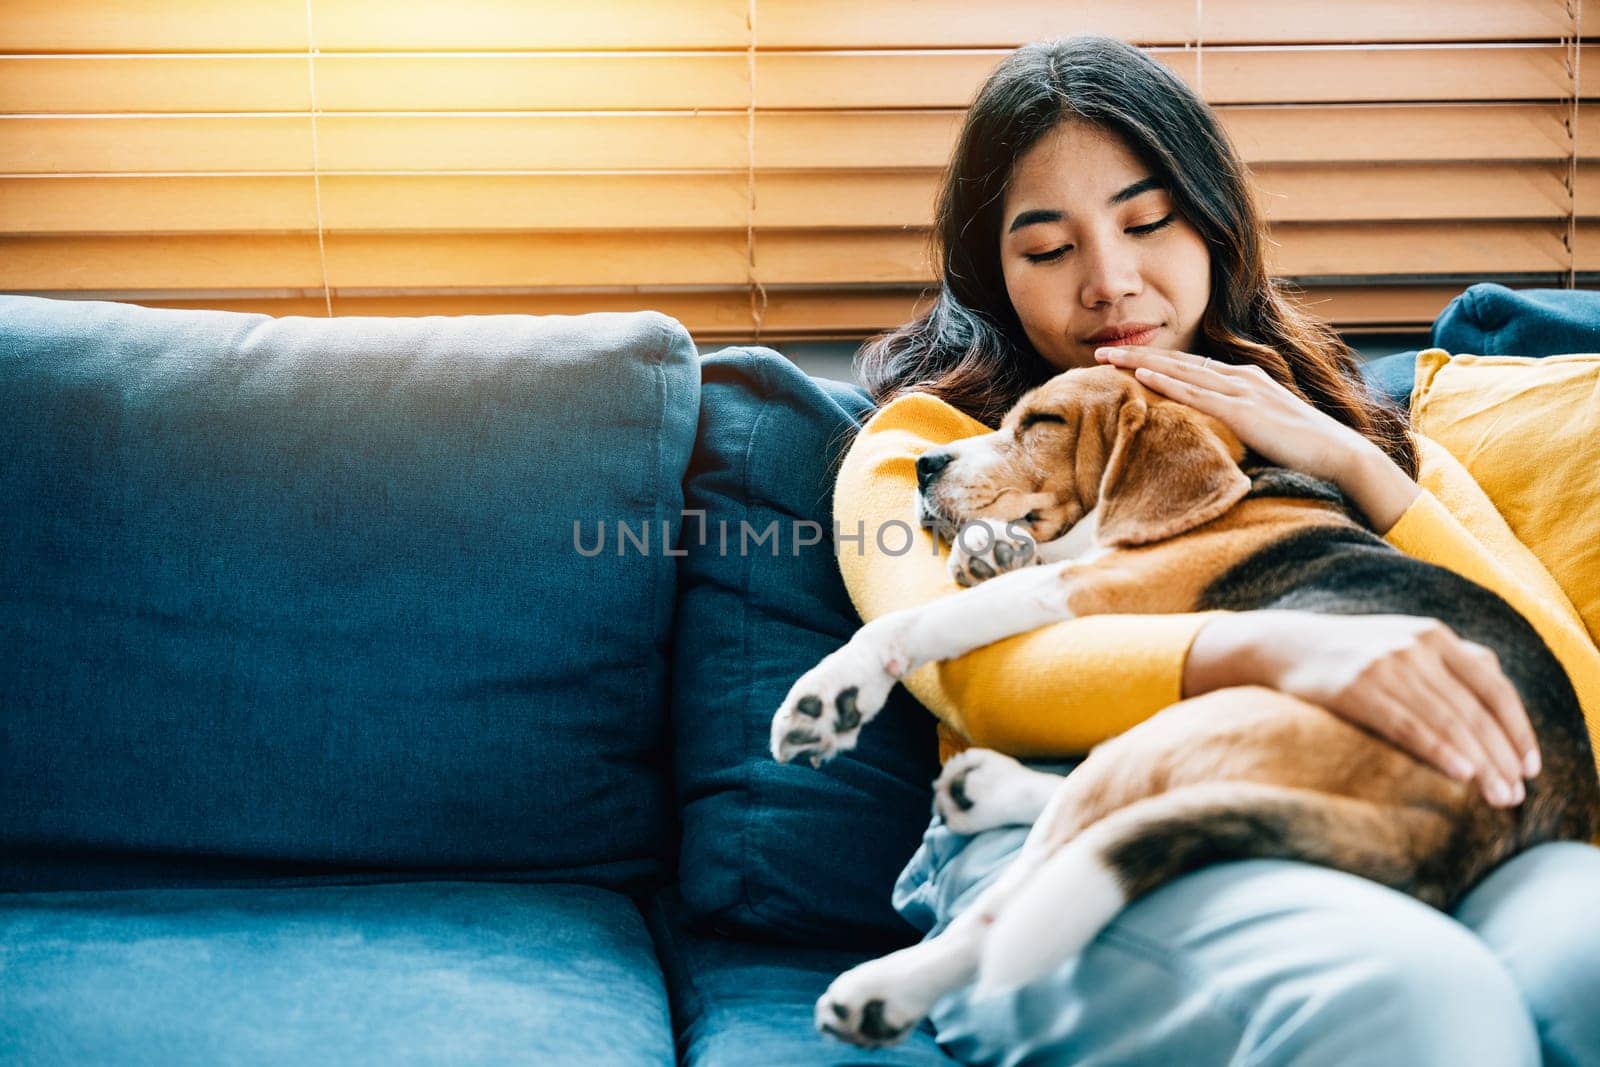 In their living room, an Asian woman and her Beagle puppy enjoy a nap on the sofa, showcasing their friendship, trust, and the joy of togetherness. It's a heartwarming portrait of love. Pet love